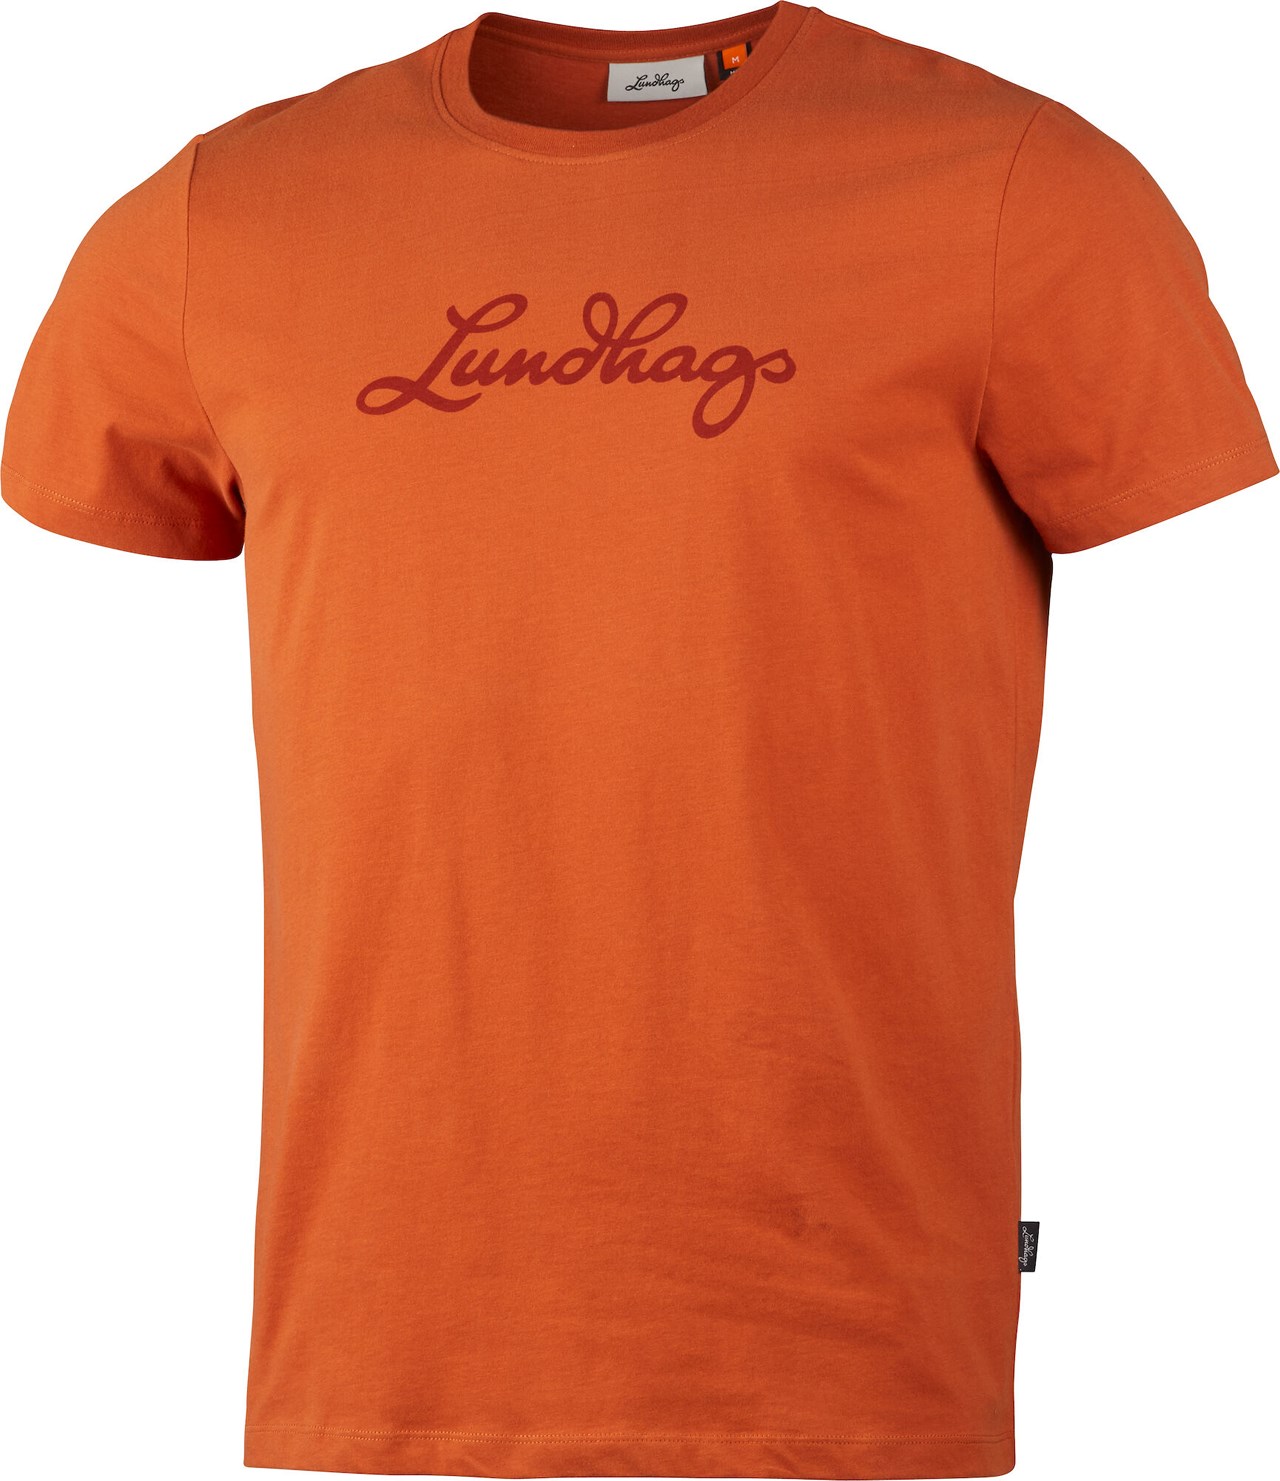 Lundhags  Ms Tee